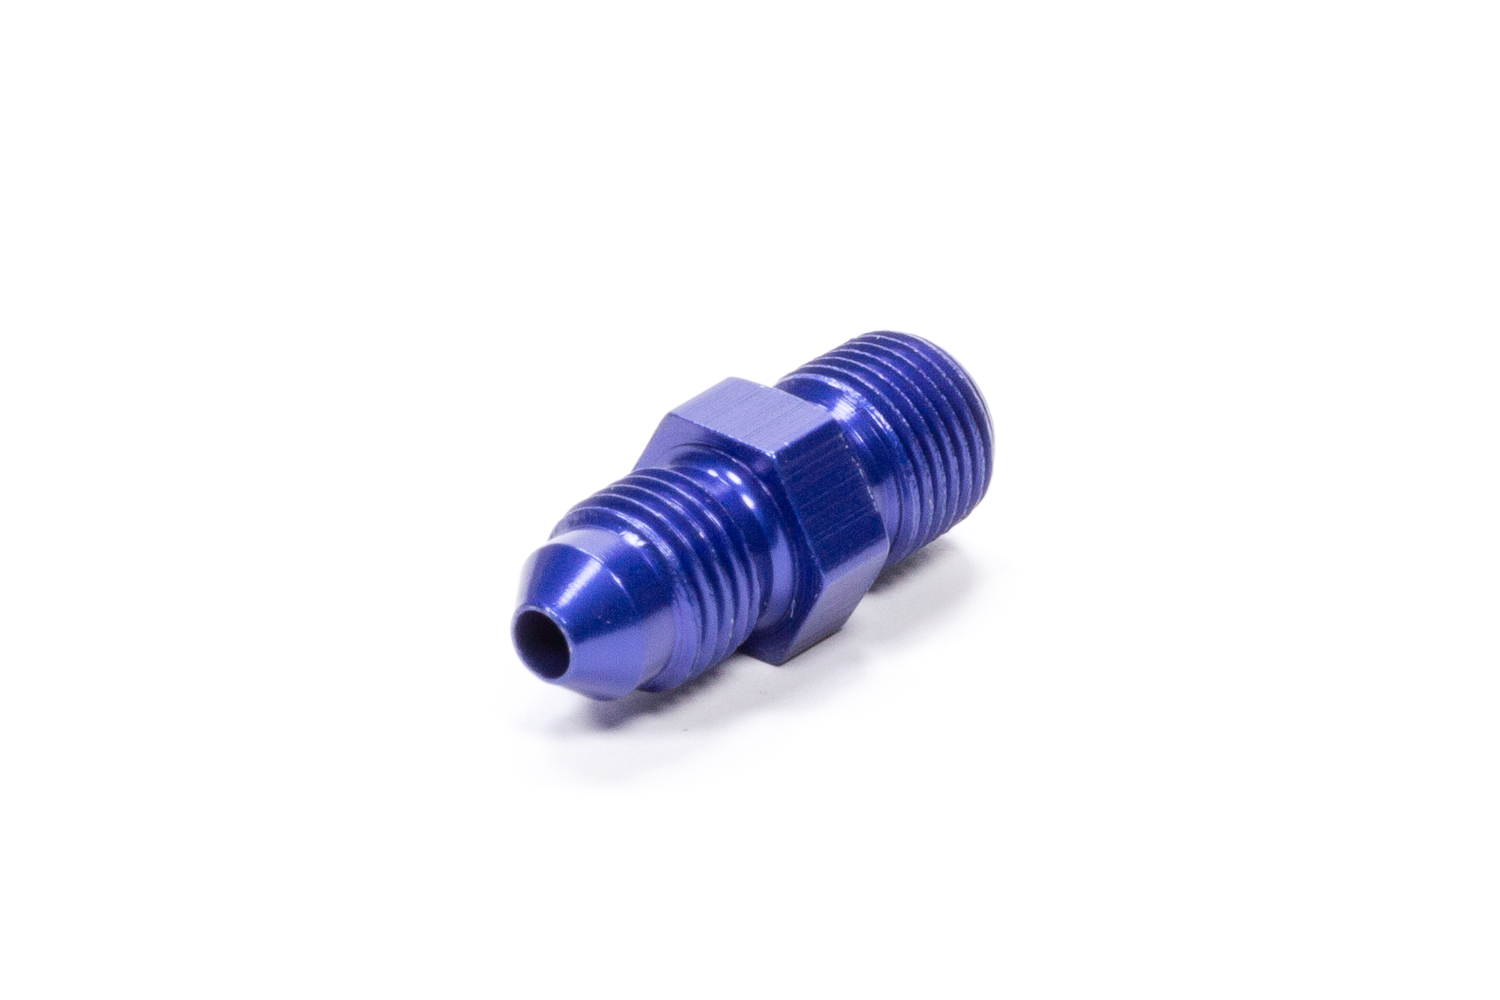 Fragola 481603 - Straight Adapter Fitting #3 x 1/8 MPT